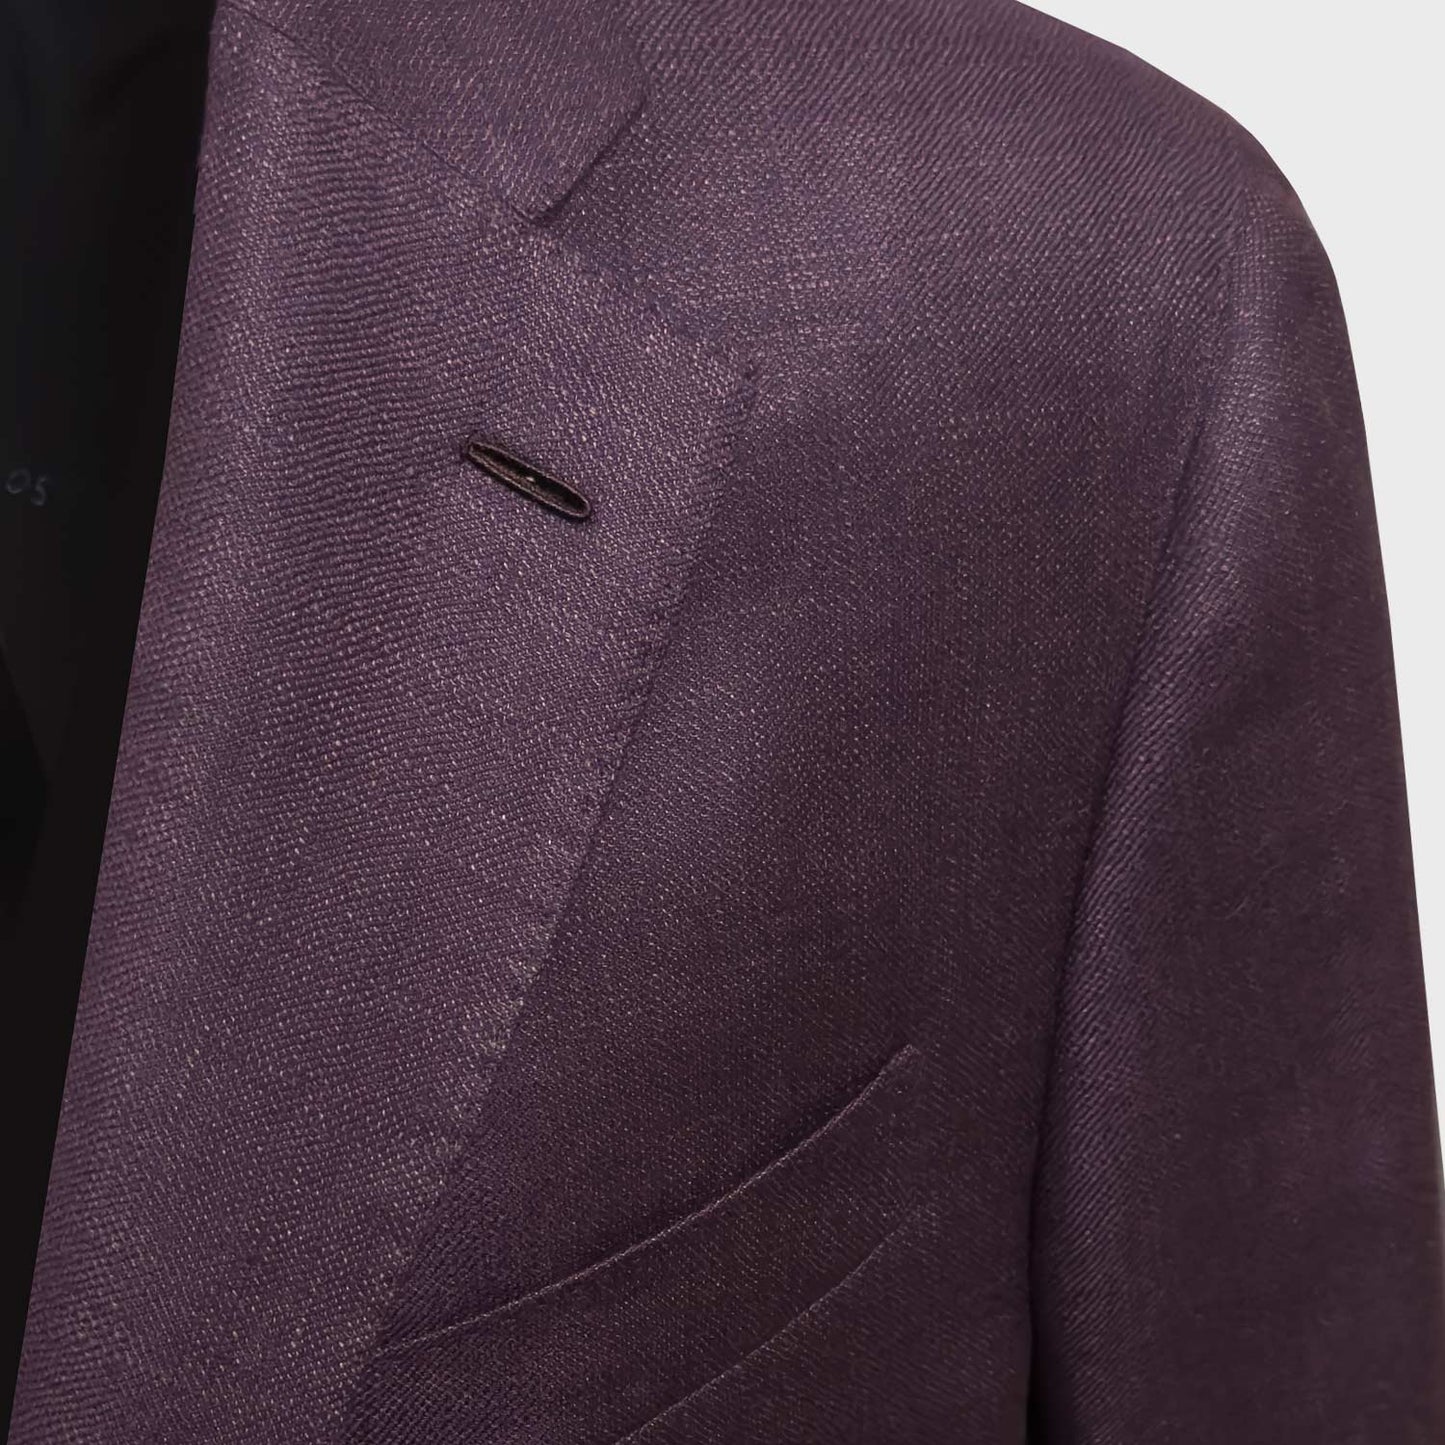 Elegant wine red purple jacket made with a soft linen and wool fabric by Reda1865. Tailored jacket made by Caruso exclusively for Wools Boutique Uomo, classic fit with a slightly structured profile, it is not short, unlined classic jacket, ideal for to wear from spring to autumn.